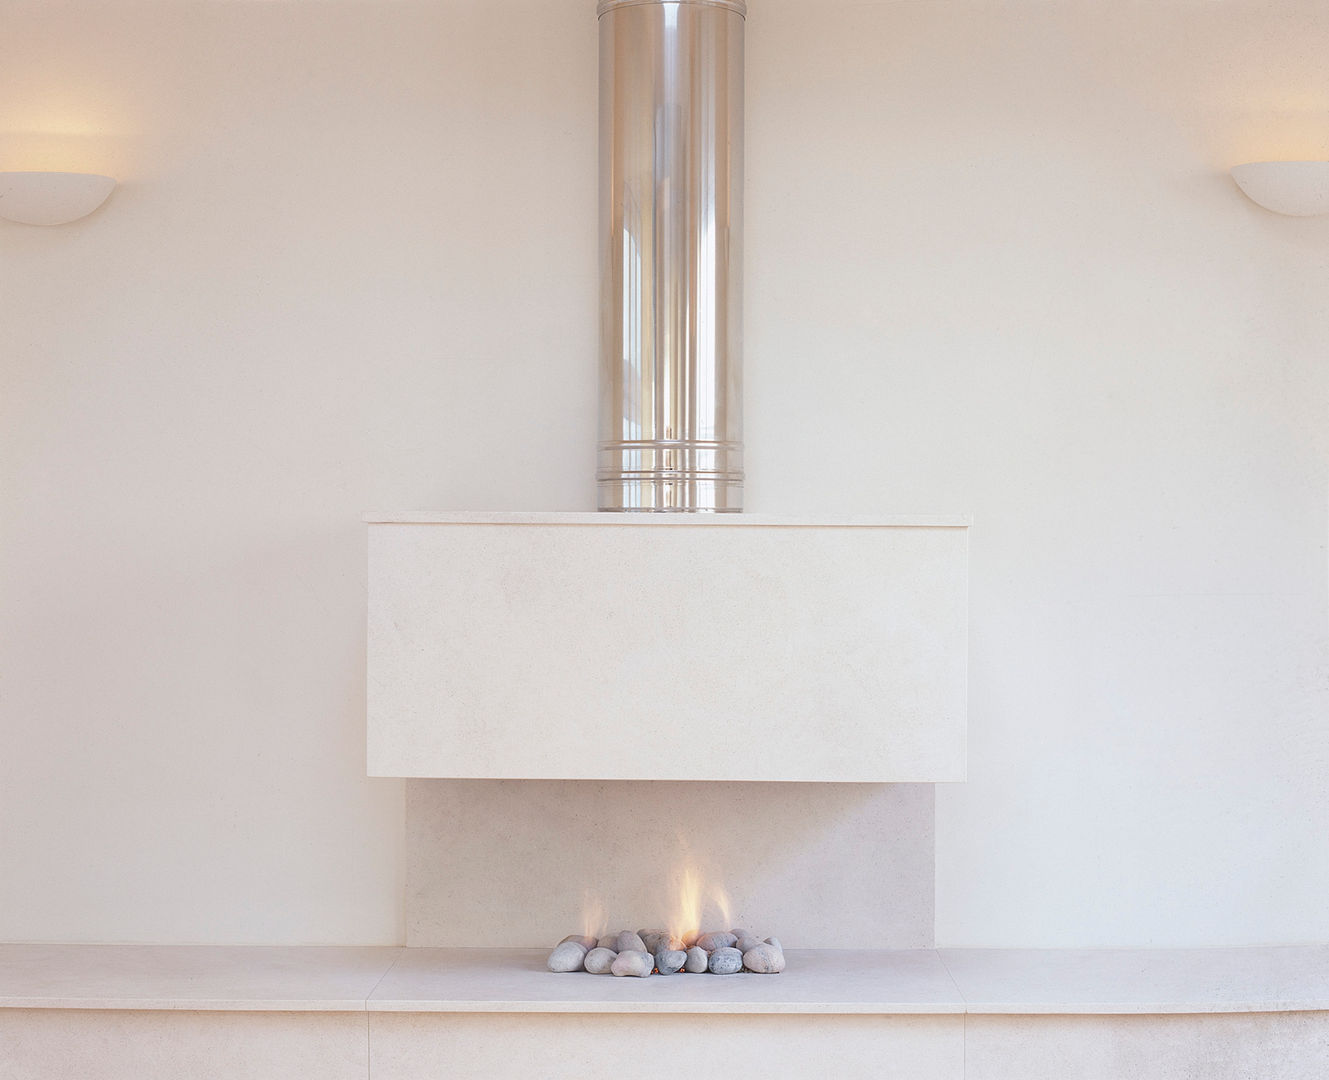 Bespoke Fireplaces: Best architects and designers in the UK, The Platonic Fireplace Company The Platonic Fireplace Company Гостиная в стиле модерн